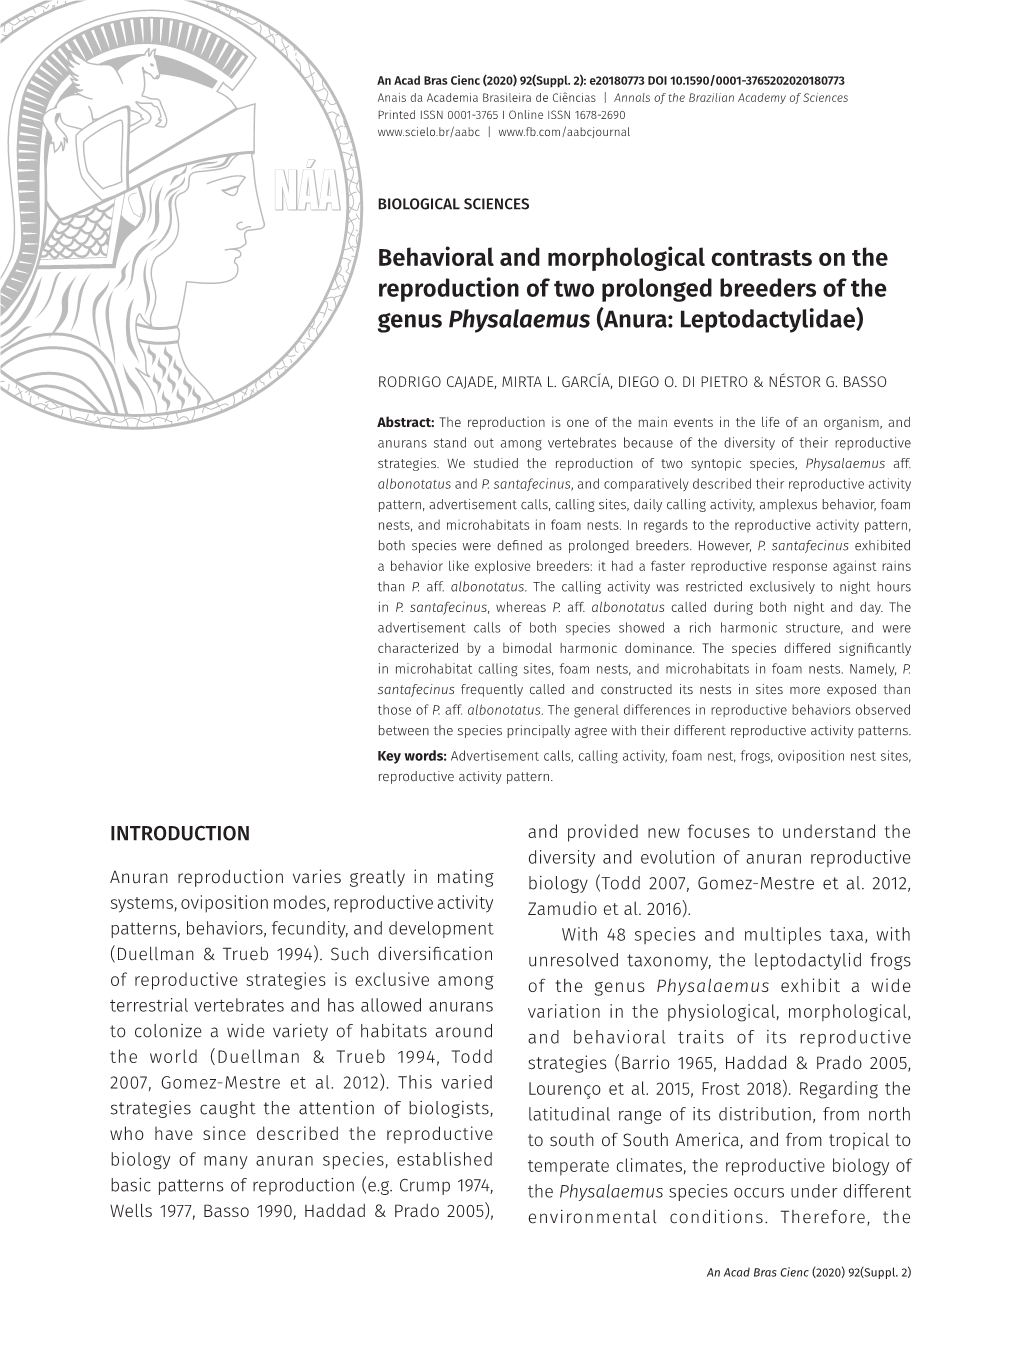 Behavioral and Morphological Contrasts on The